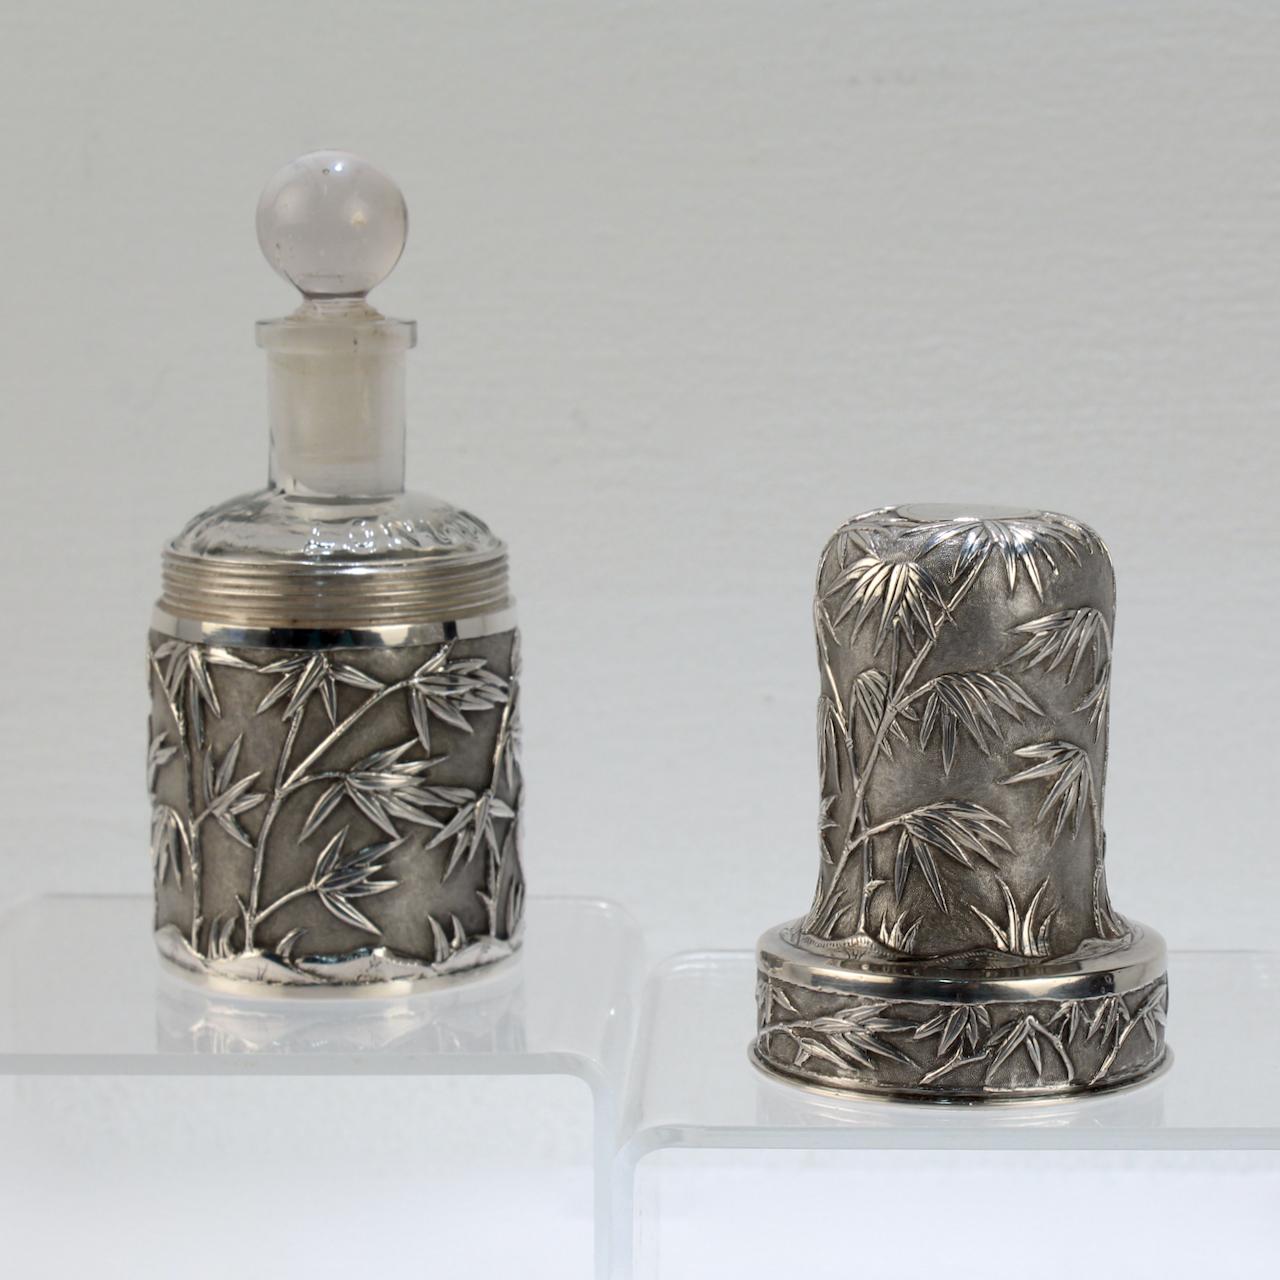 Antique Wang Hing & Co. Chinese Export Silver Travel Dresser Bottle In Good Condition For Sale In Philadelphia, PA